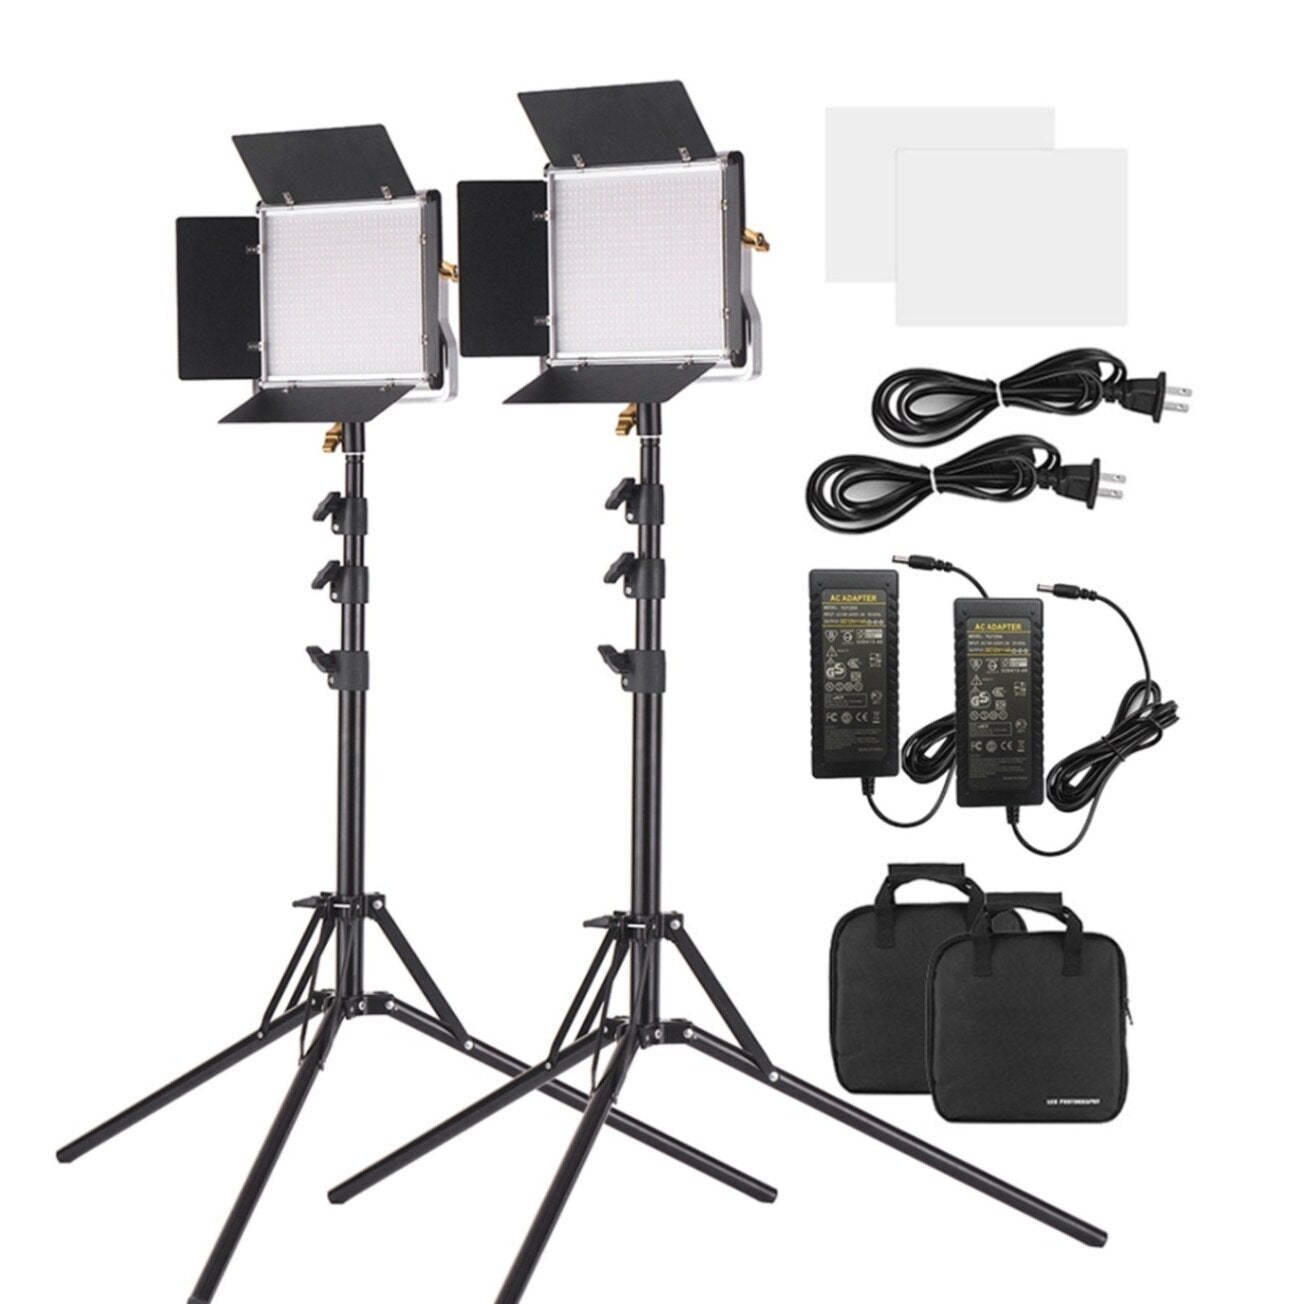 Andoer LED Video Light Light Panel with 78.7 Inches Light Stand 660 LED Bulbs 3200-5600K with Barndoor for Studio Photography